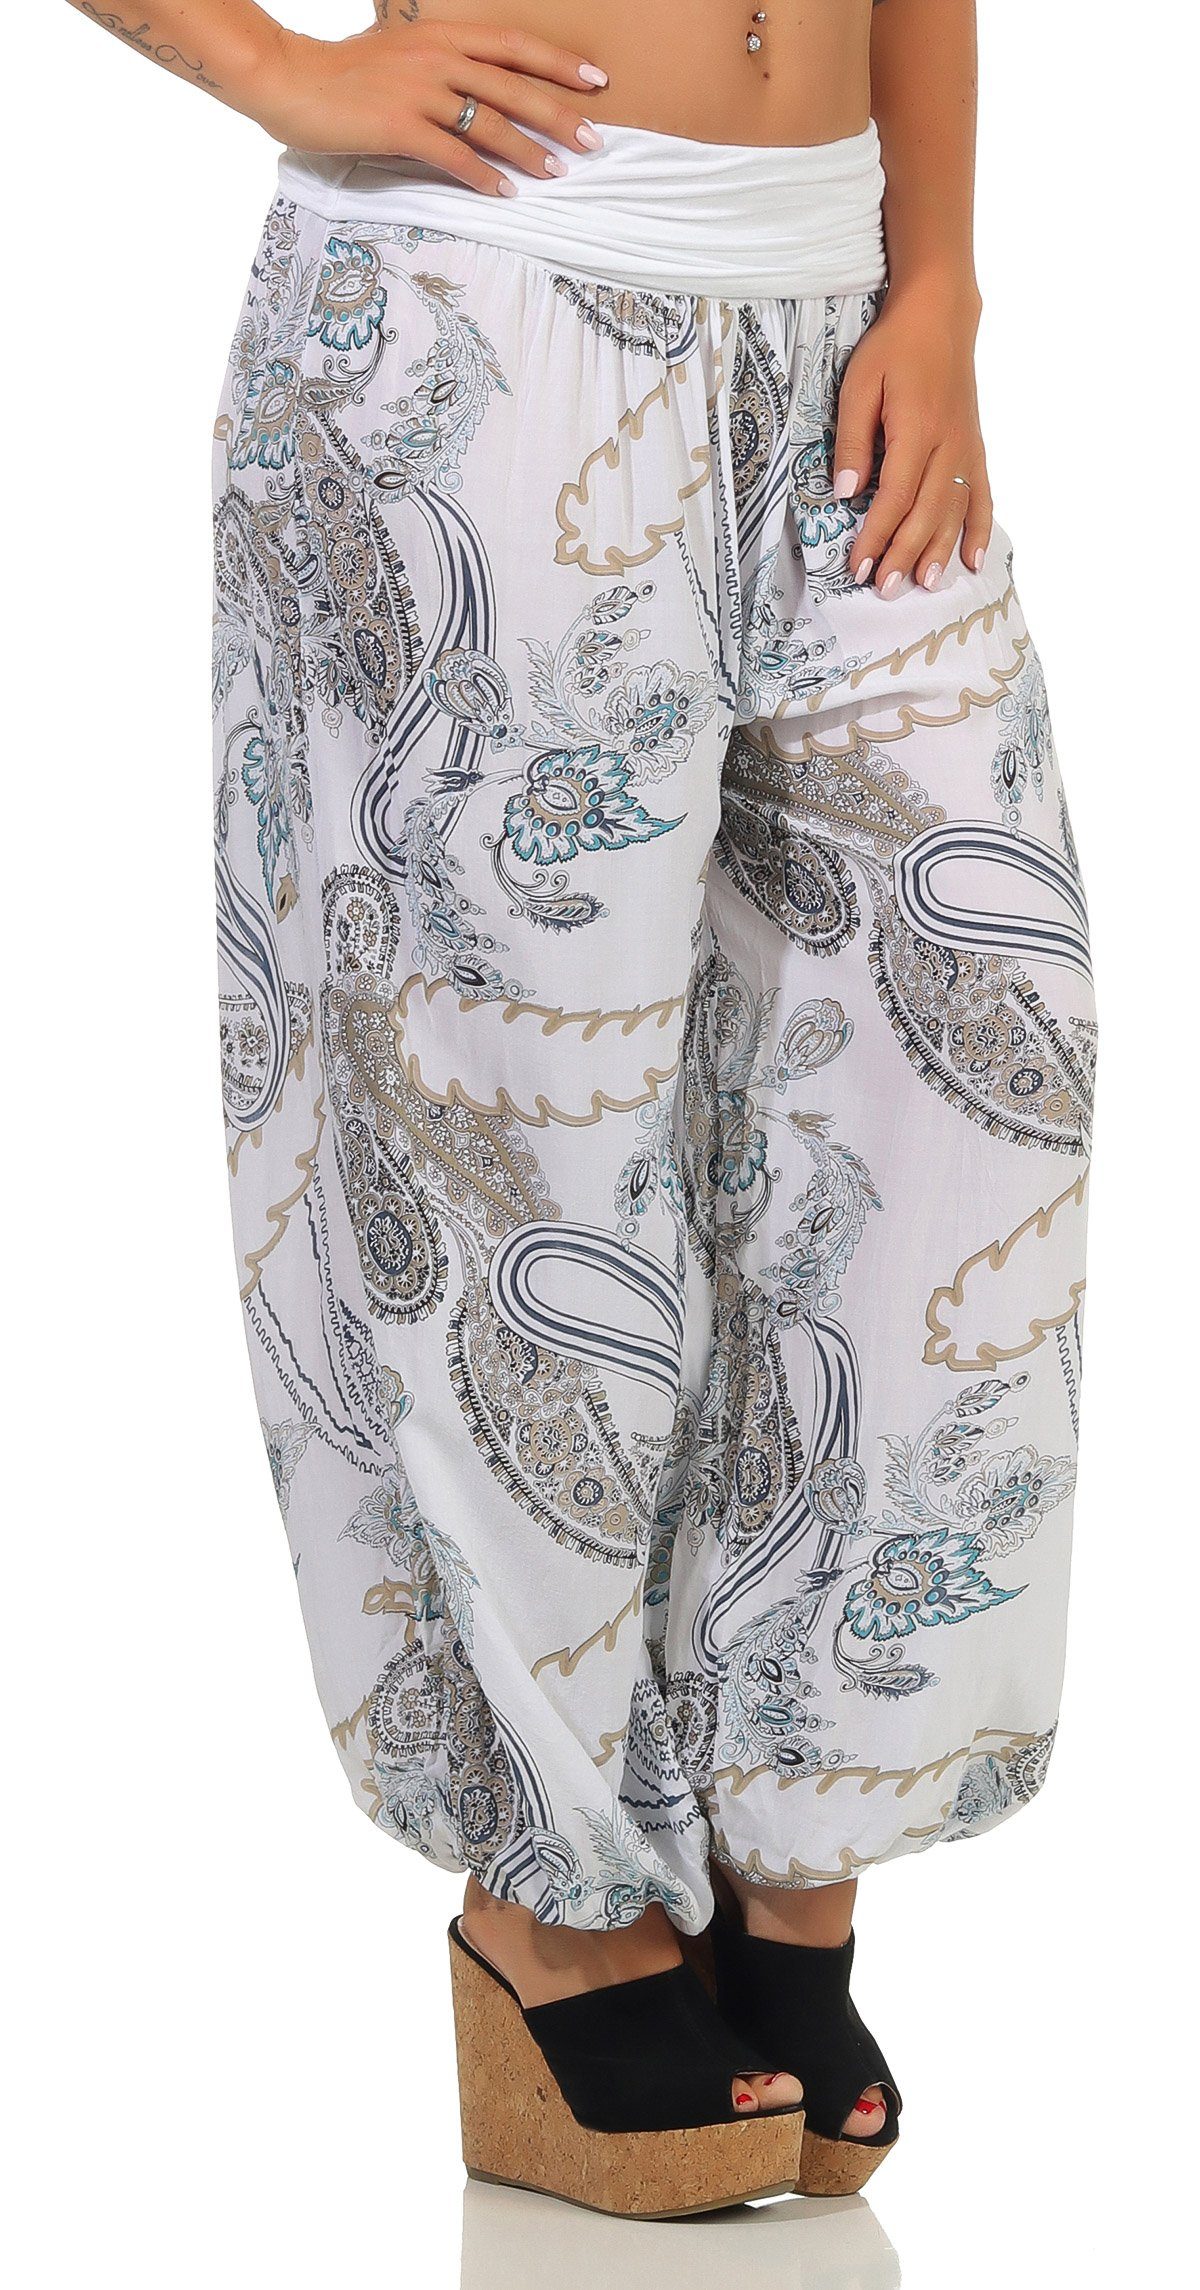 malito more than fashion Haremshose mit All-Over-Print 7185 weiß Pluderhose